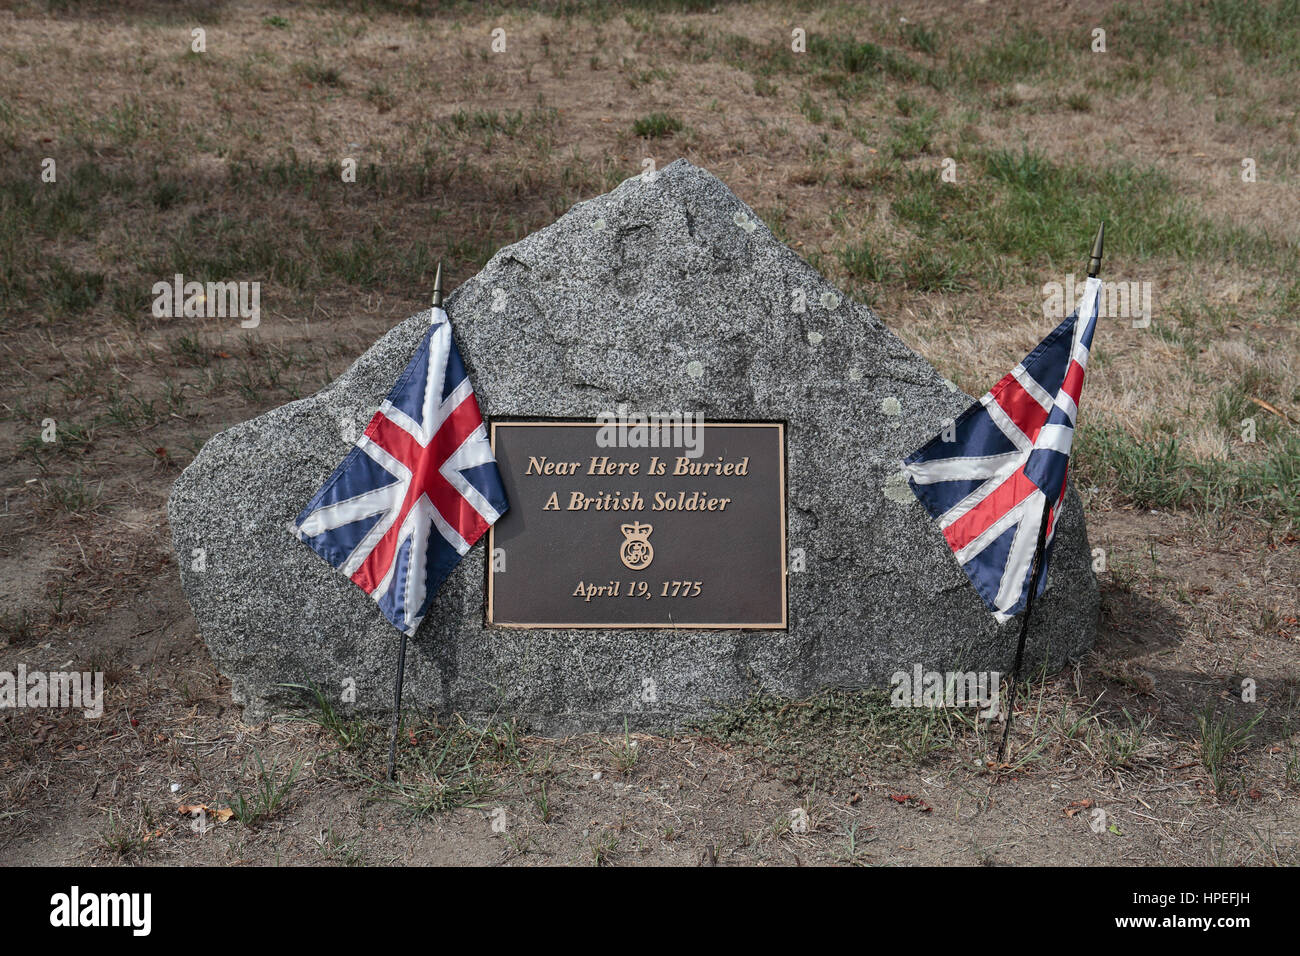 Grave marker for British soldiers in in Minute Man National Historical Park, Middlesex County, Massachusetts, United States. Stock Photo